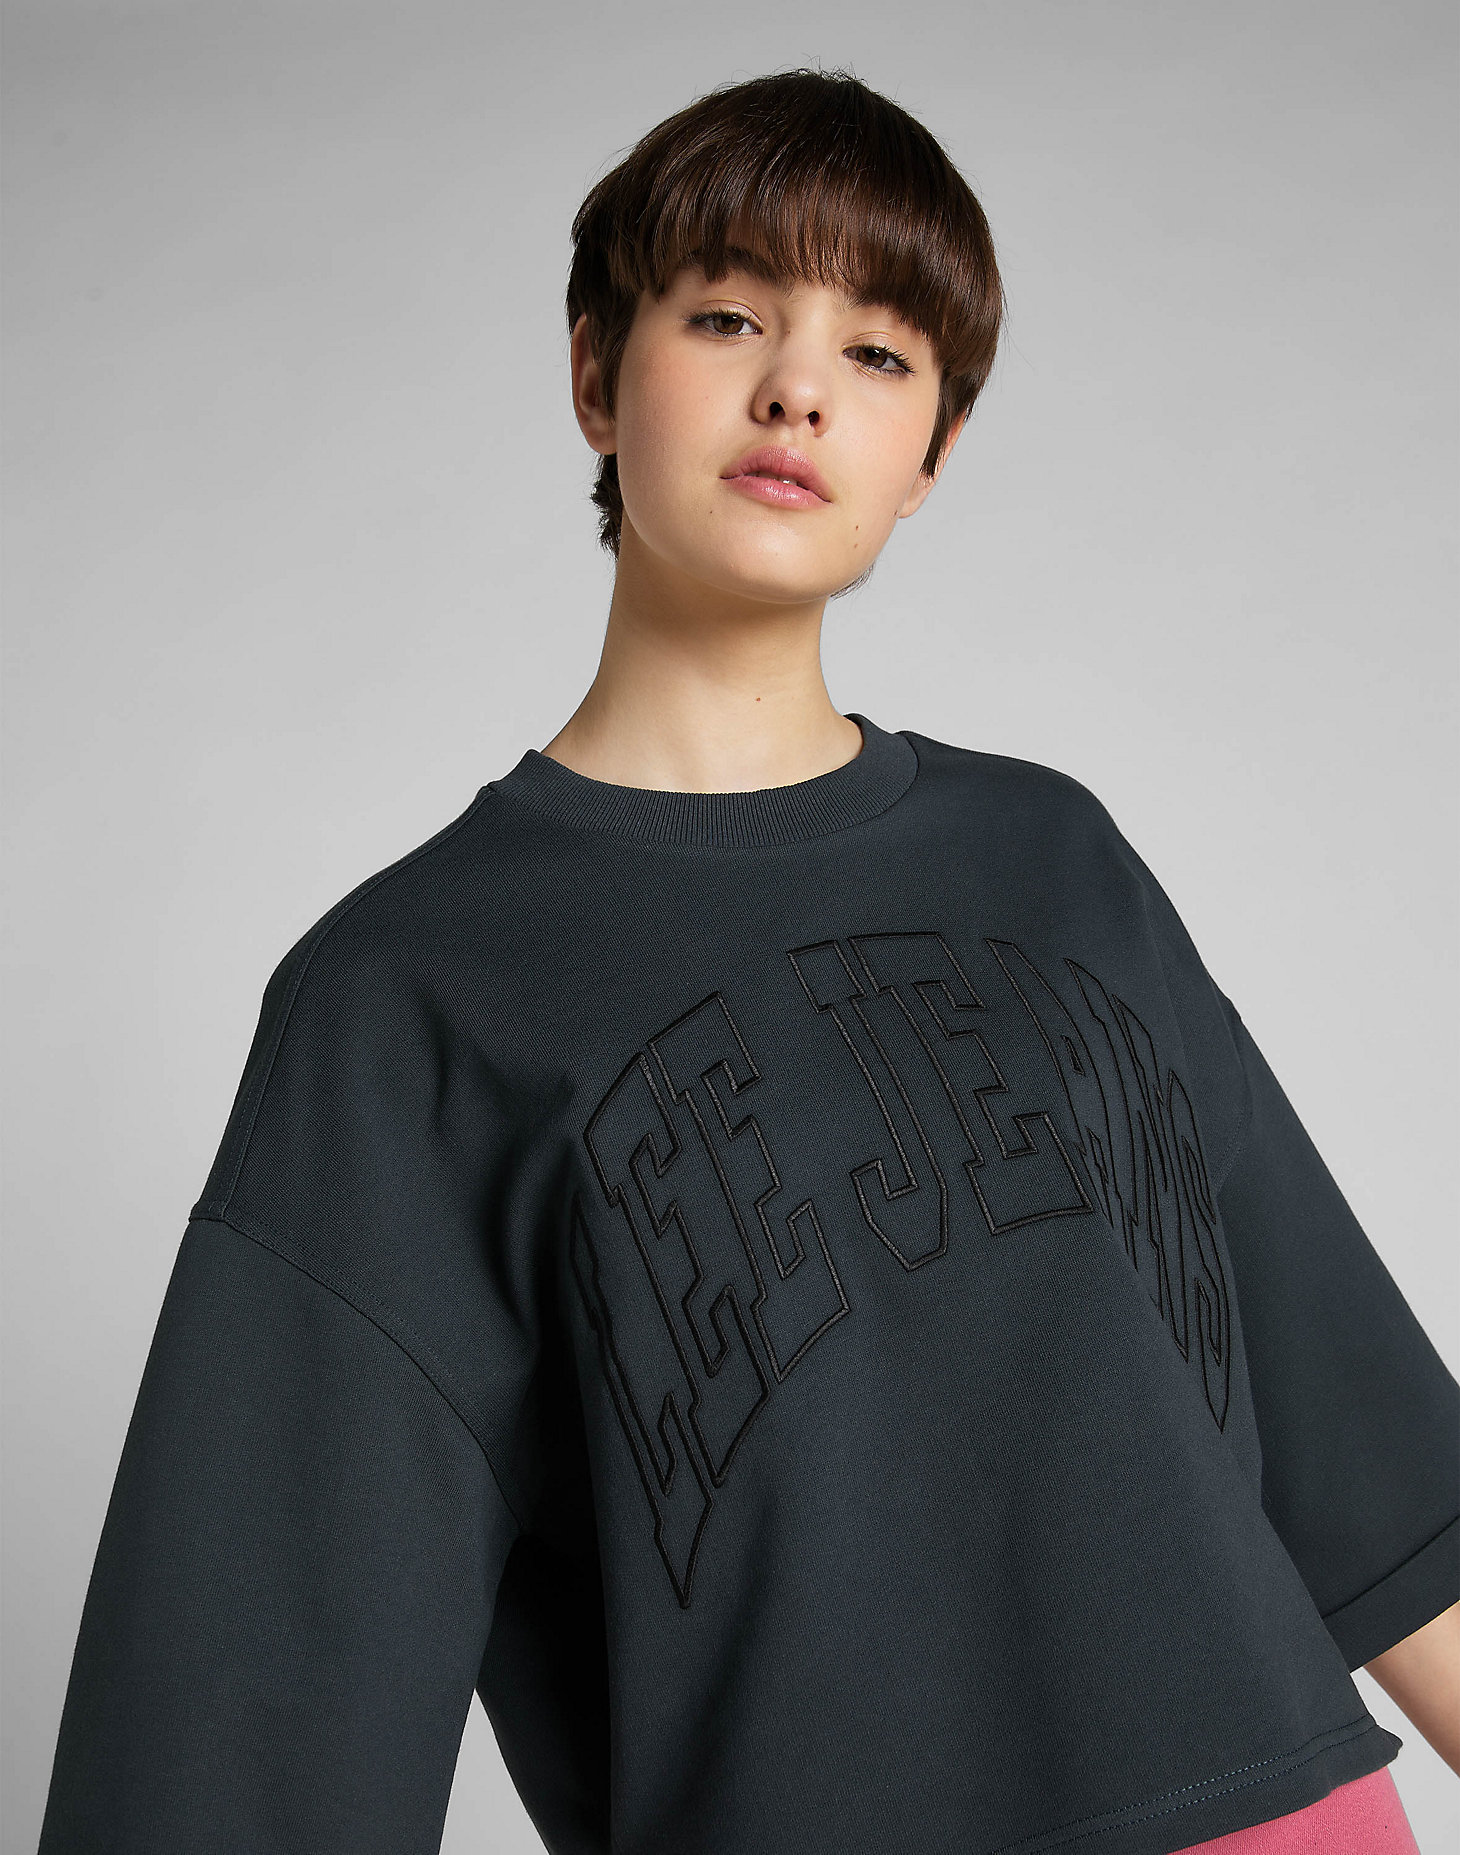 Cropped Sweatshirt in Charcoal alternative view 4